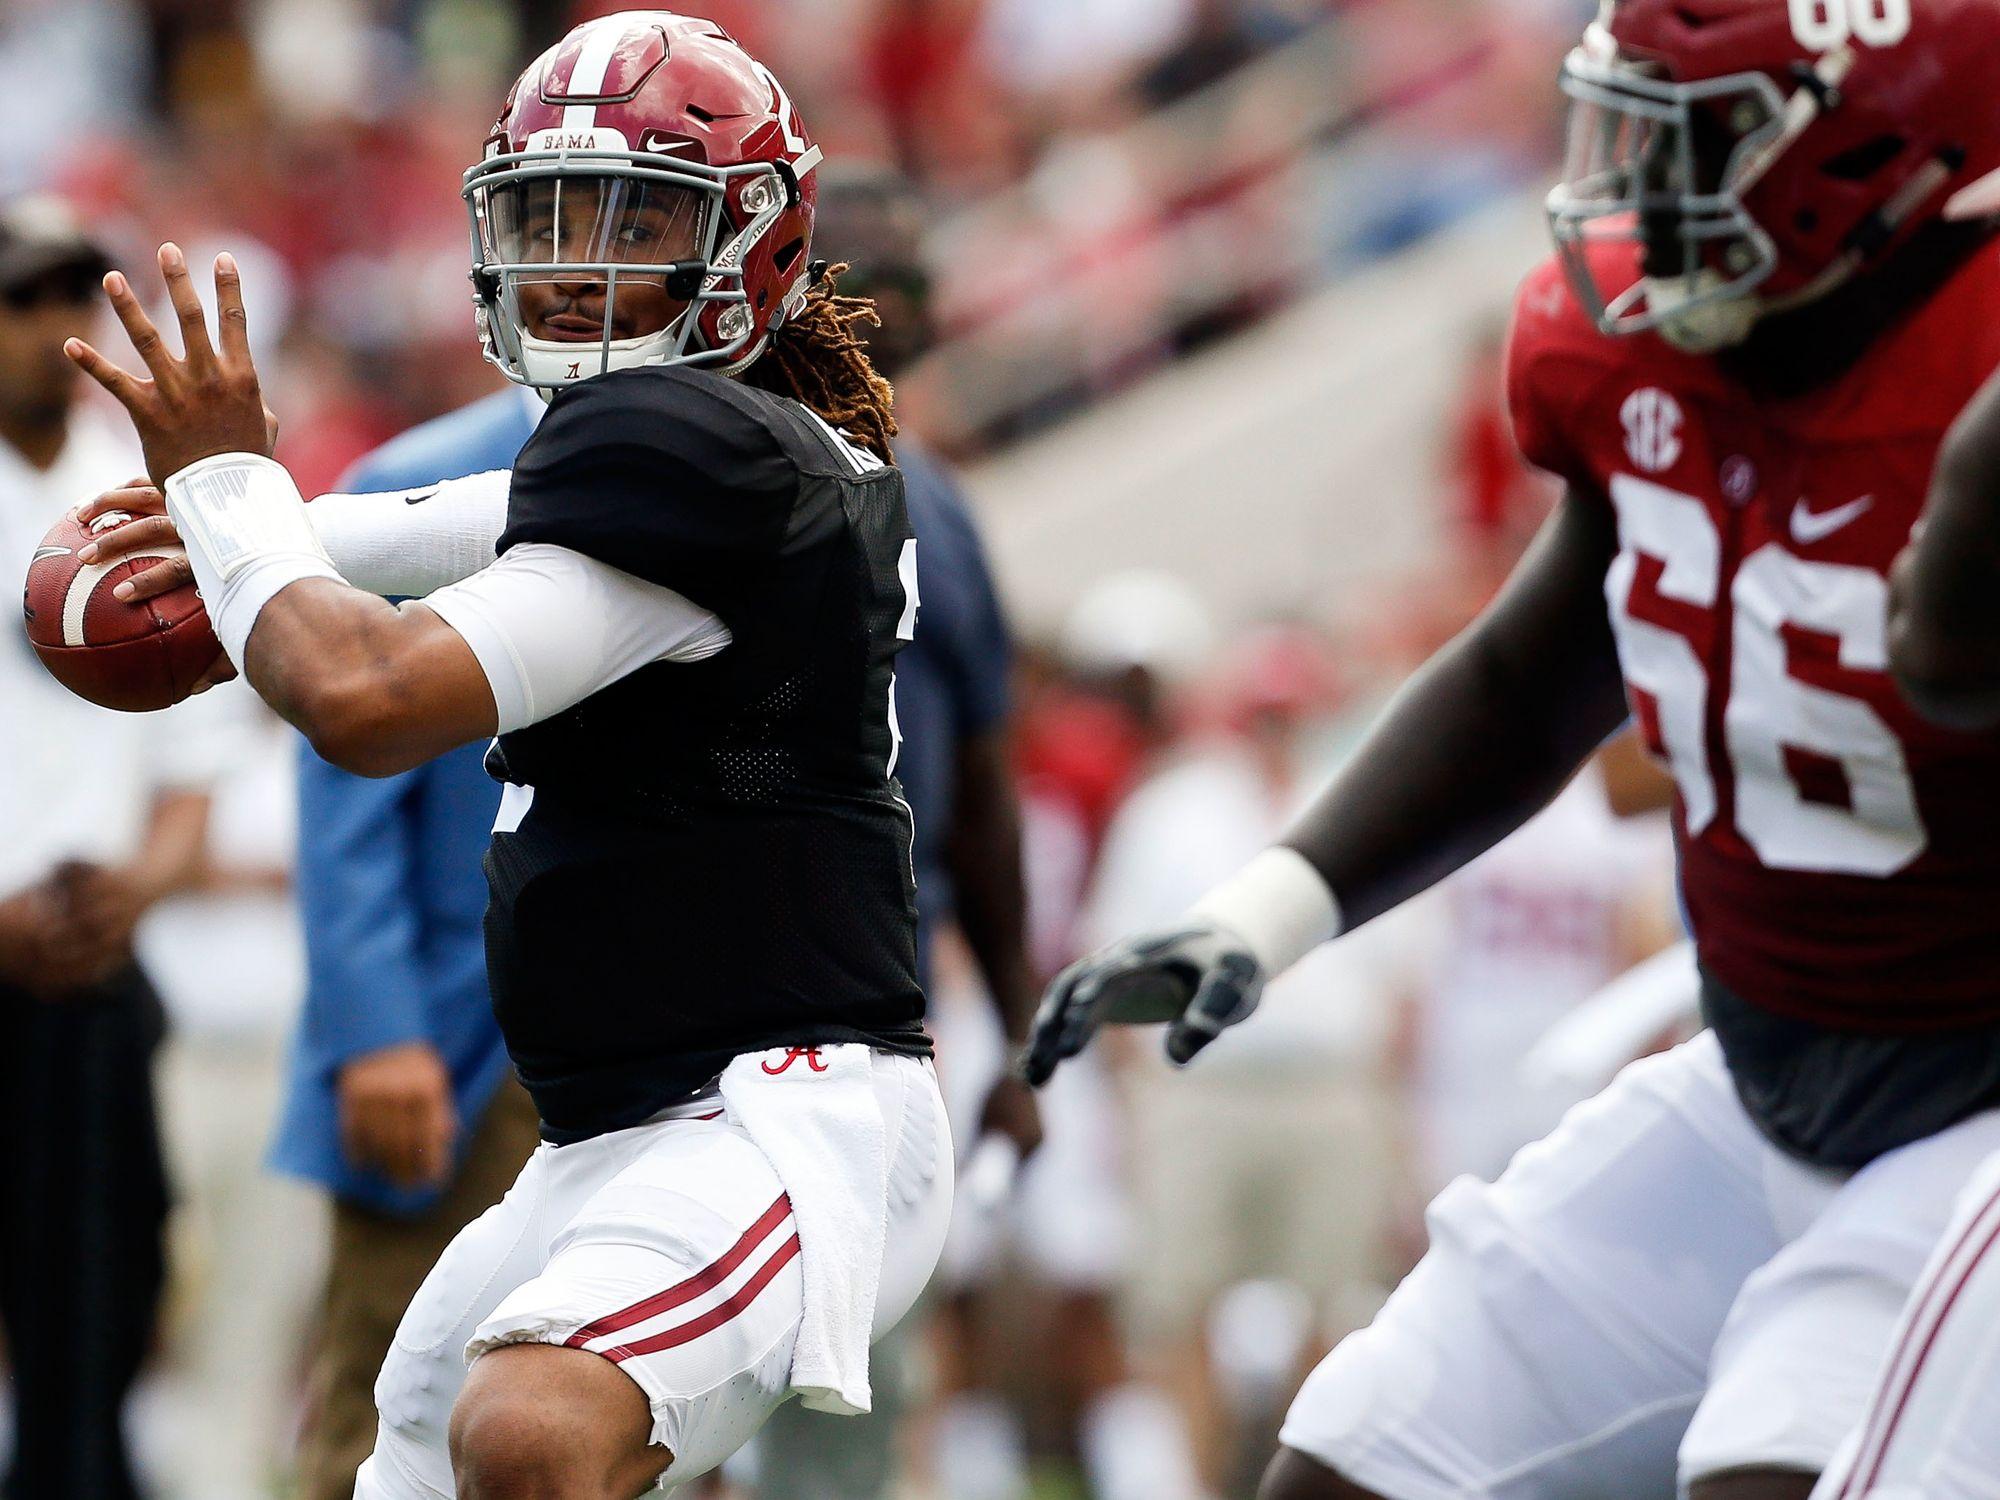 Alabama spring game: Lessons learned about the Crimson Tide